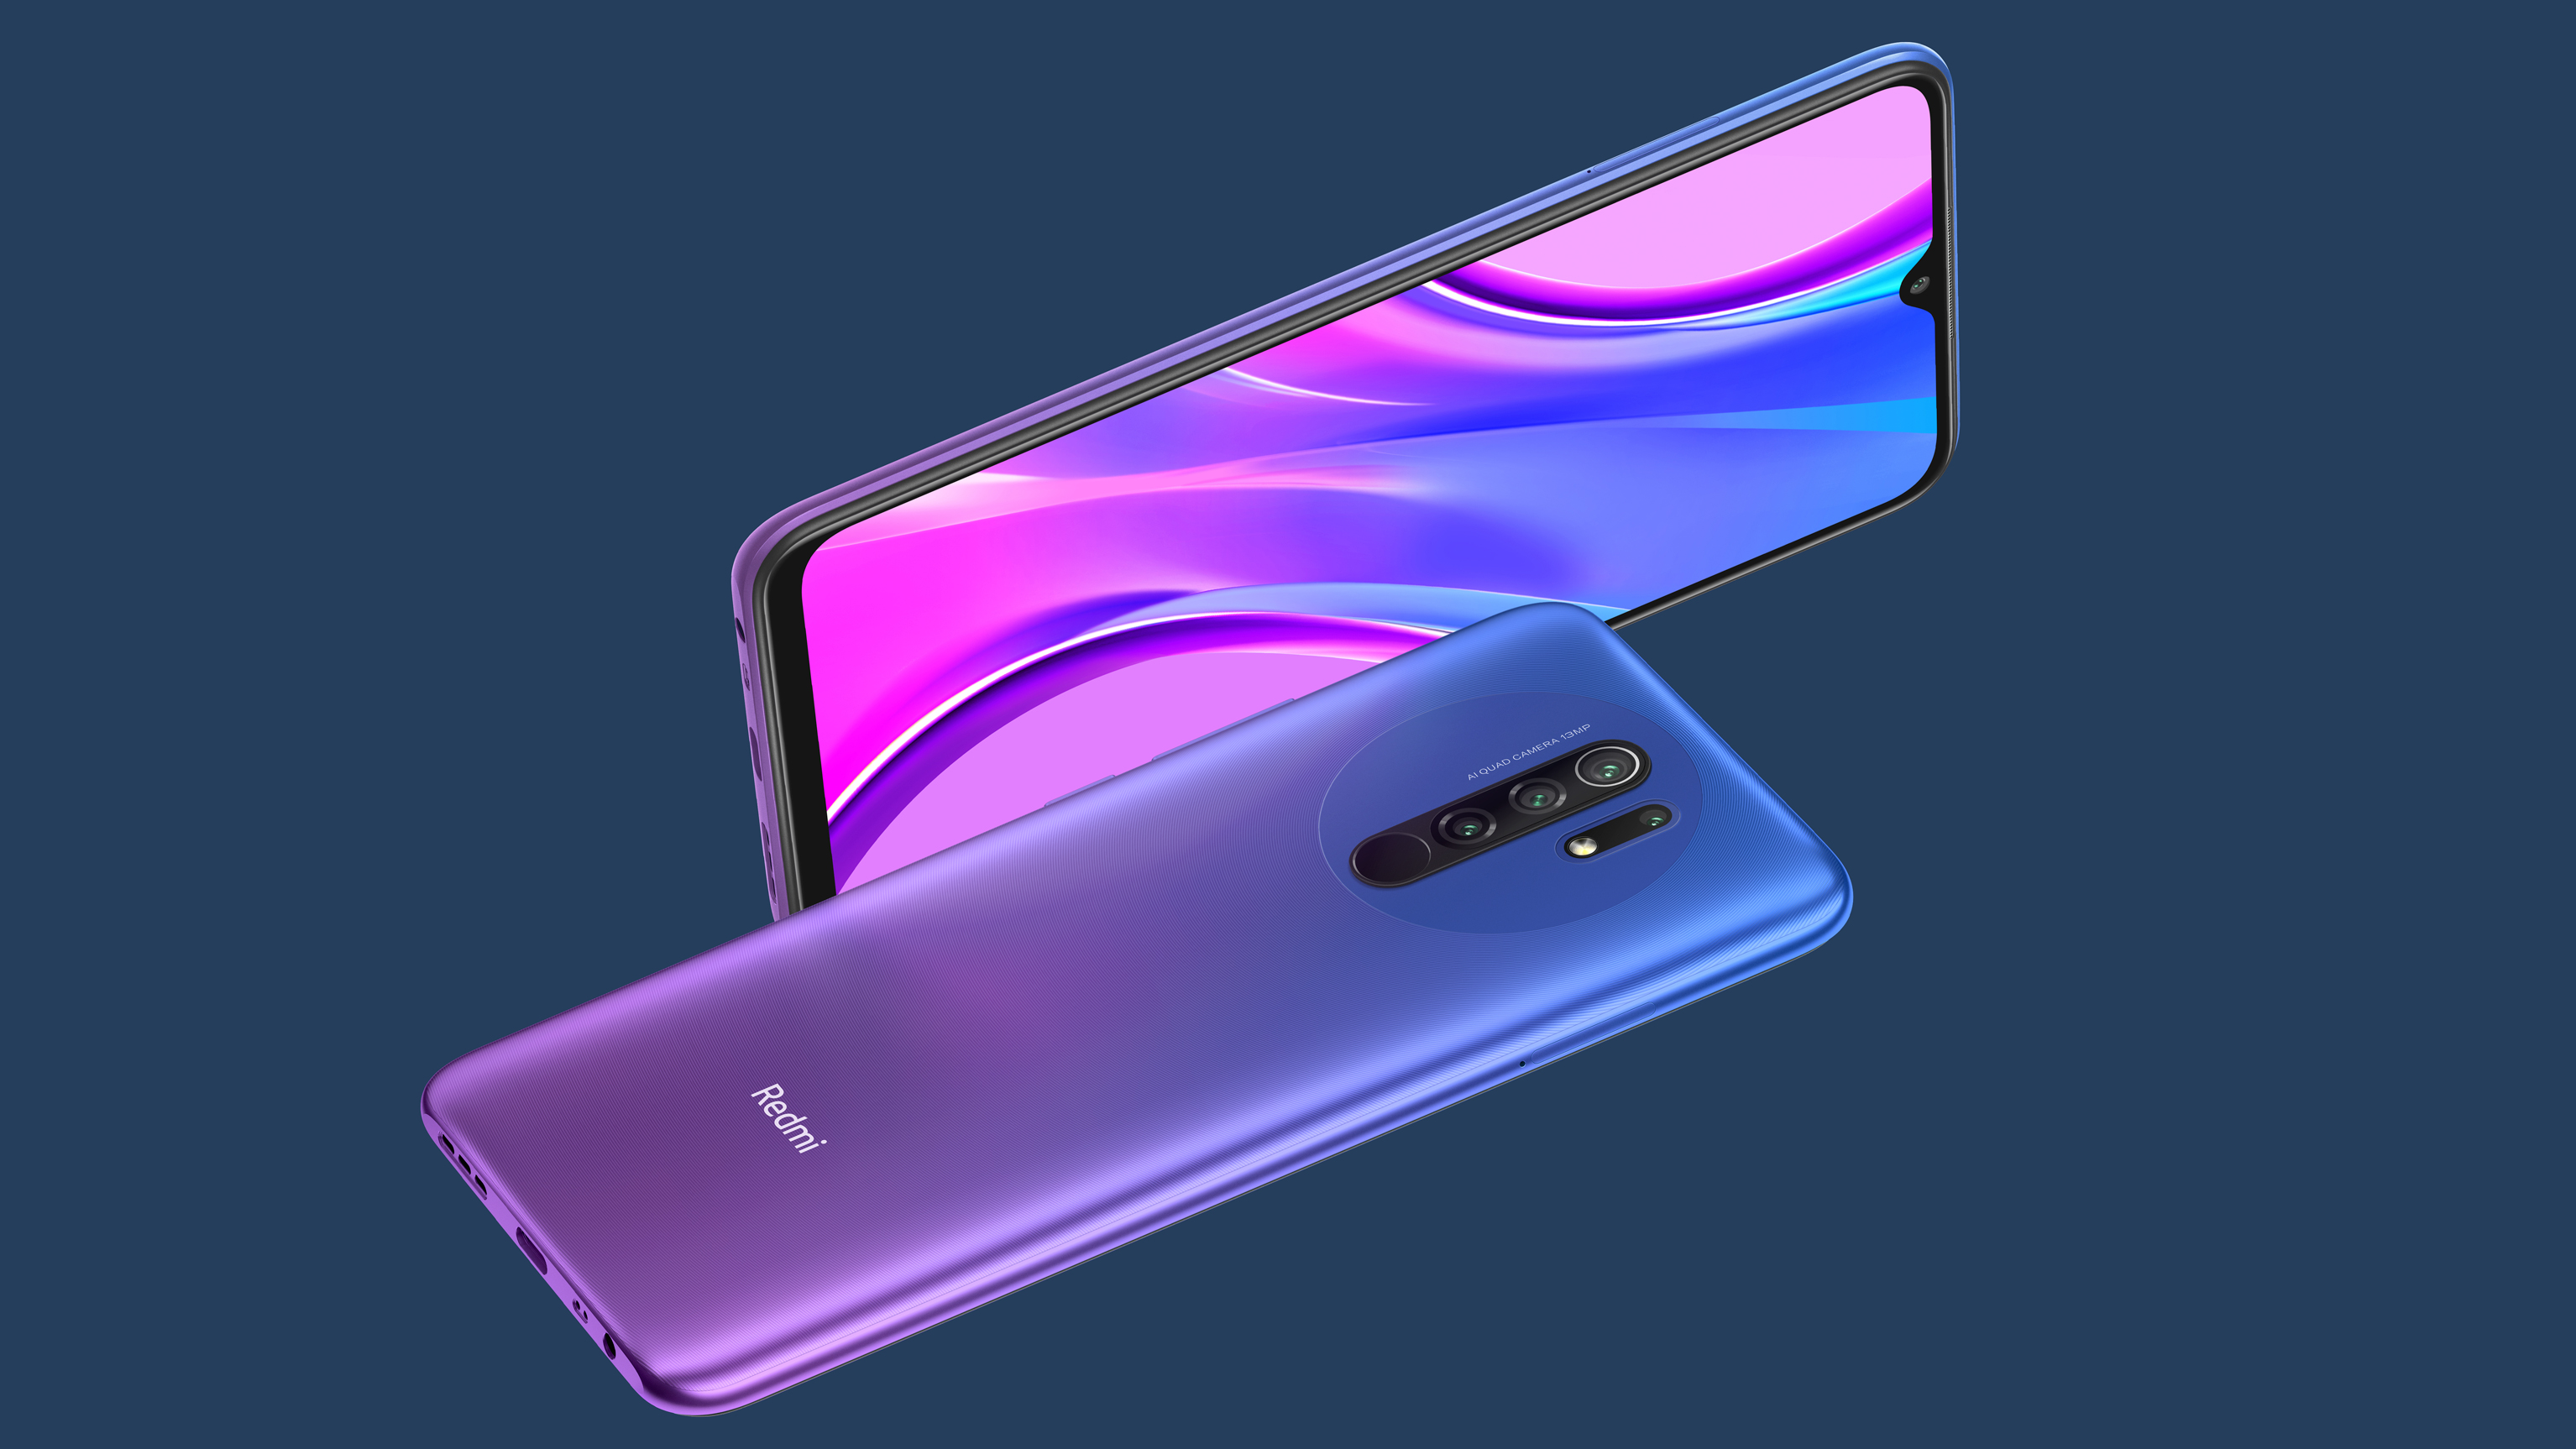  A purple Xiaomi Redmi Note 9 Pro smartphone with four rear cameras and a gradient color from blue to purple.